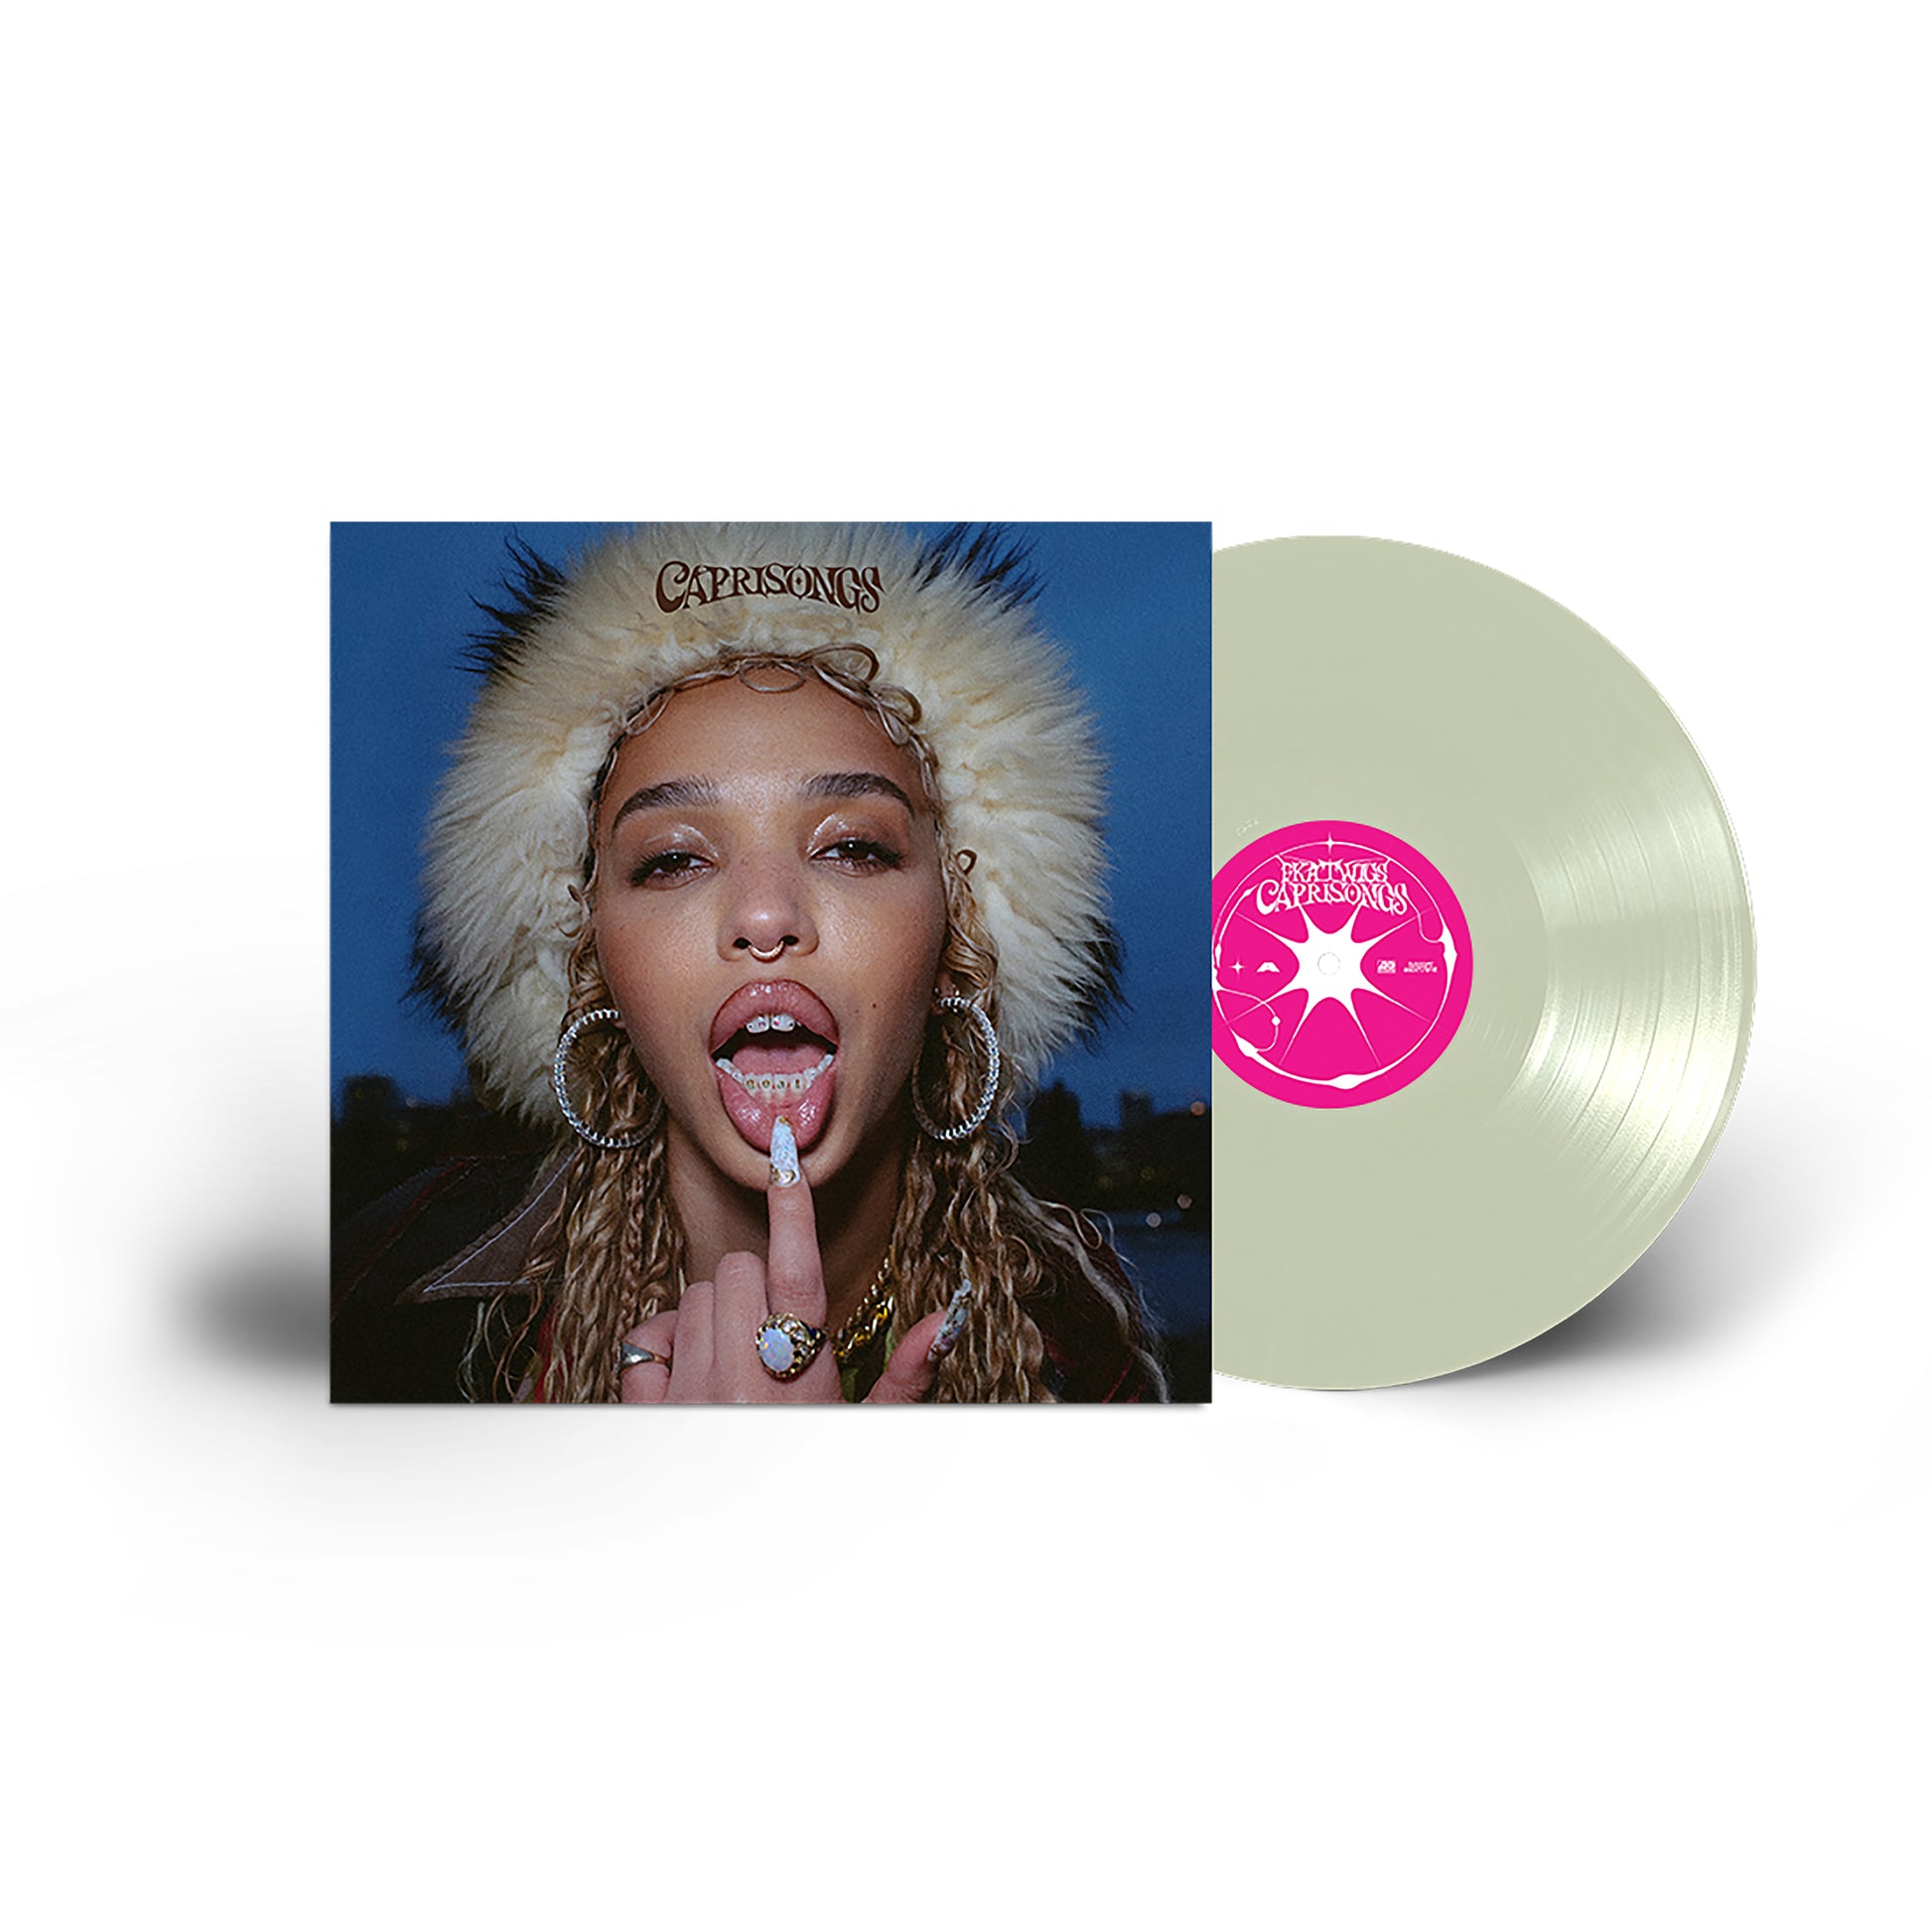 FKA twigs - CAPRISONGS (Indie Exclusive, Glow in the Dark Vinyl, Limited Edition) - Joco Records